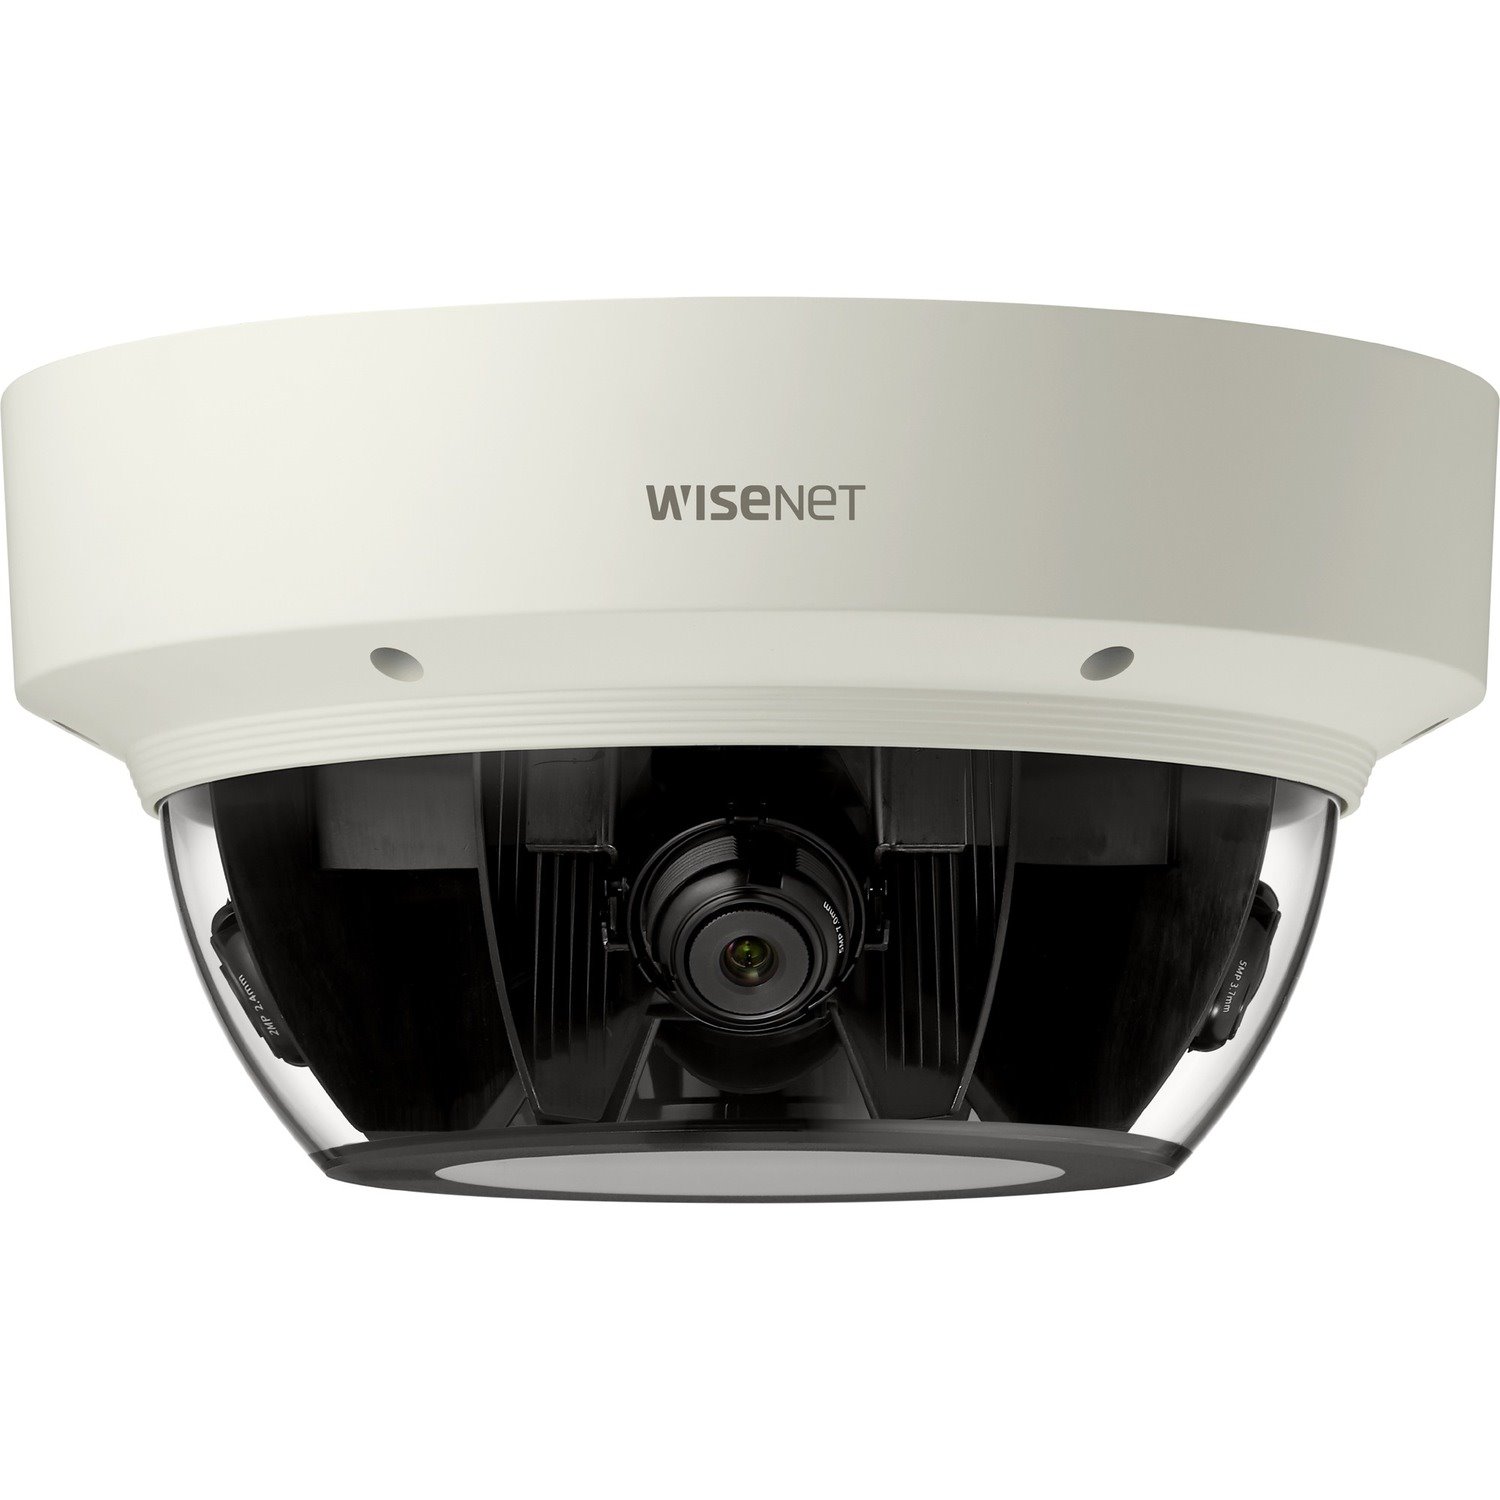 Wisenet PNM-9000VQ 5 Megapixel Outdoor HD Network Camera - Dome